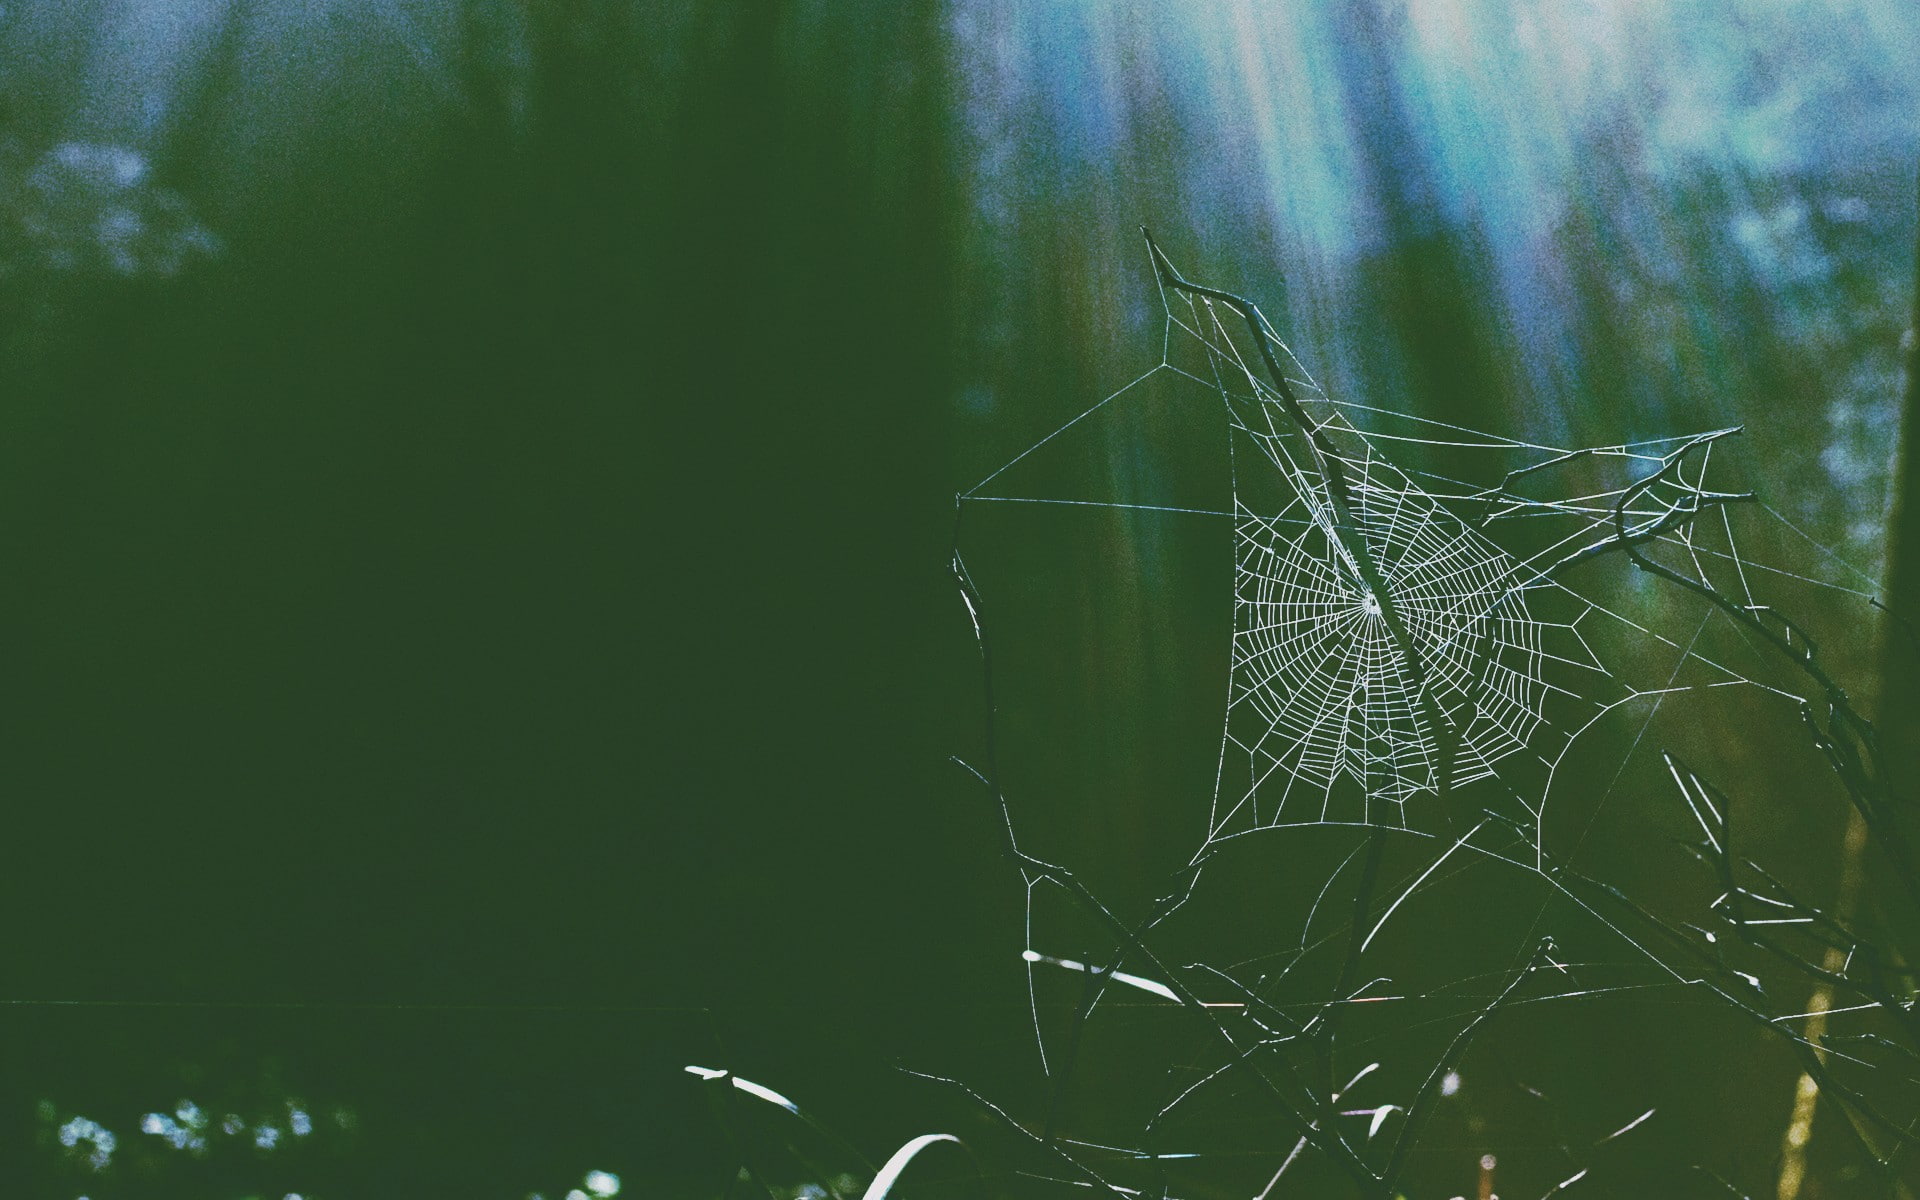 spider, horror, plant, spider web, close-up, nature, green color